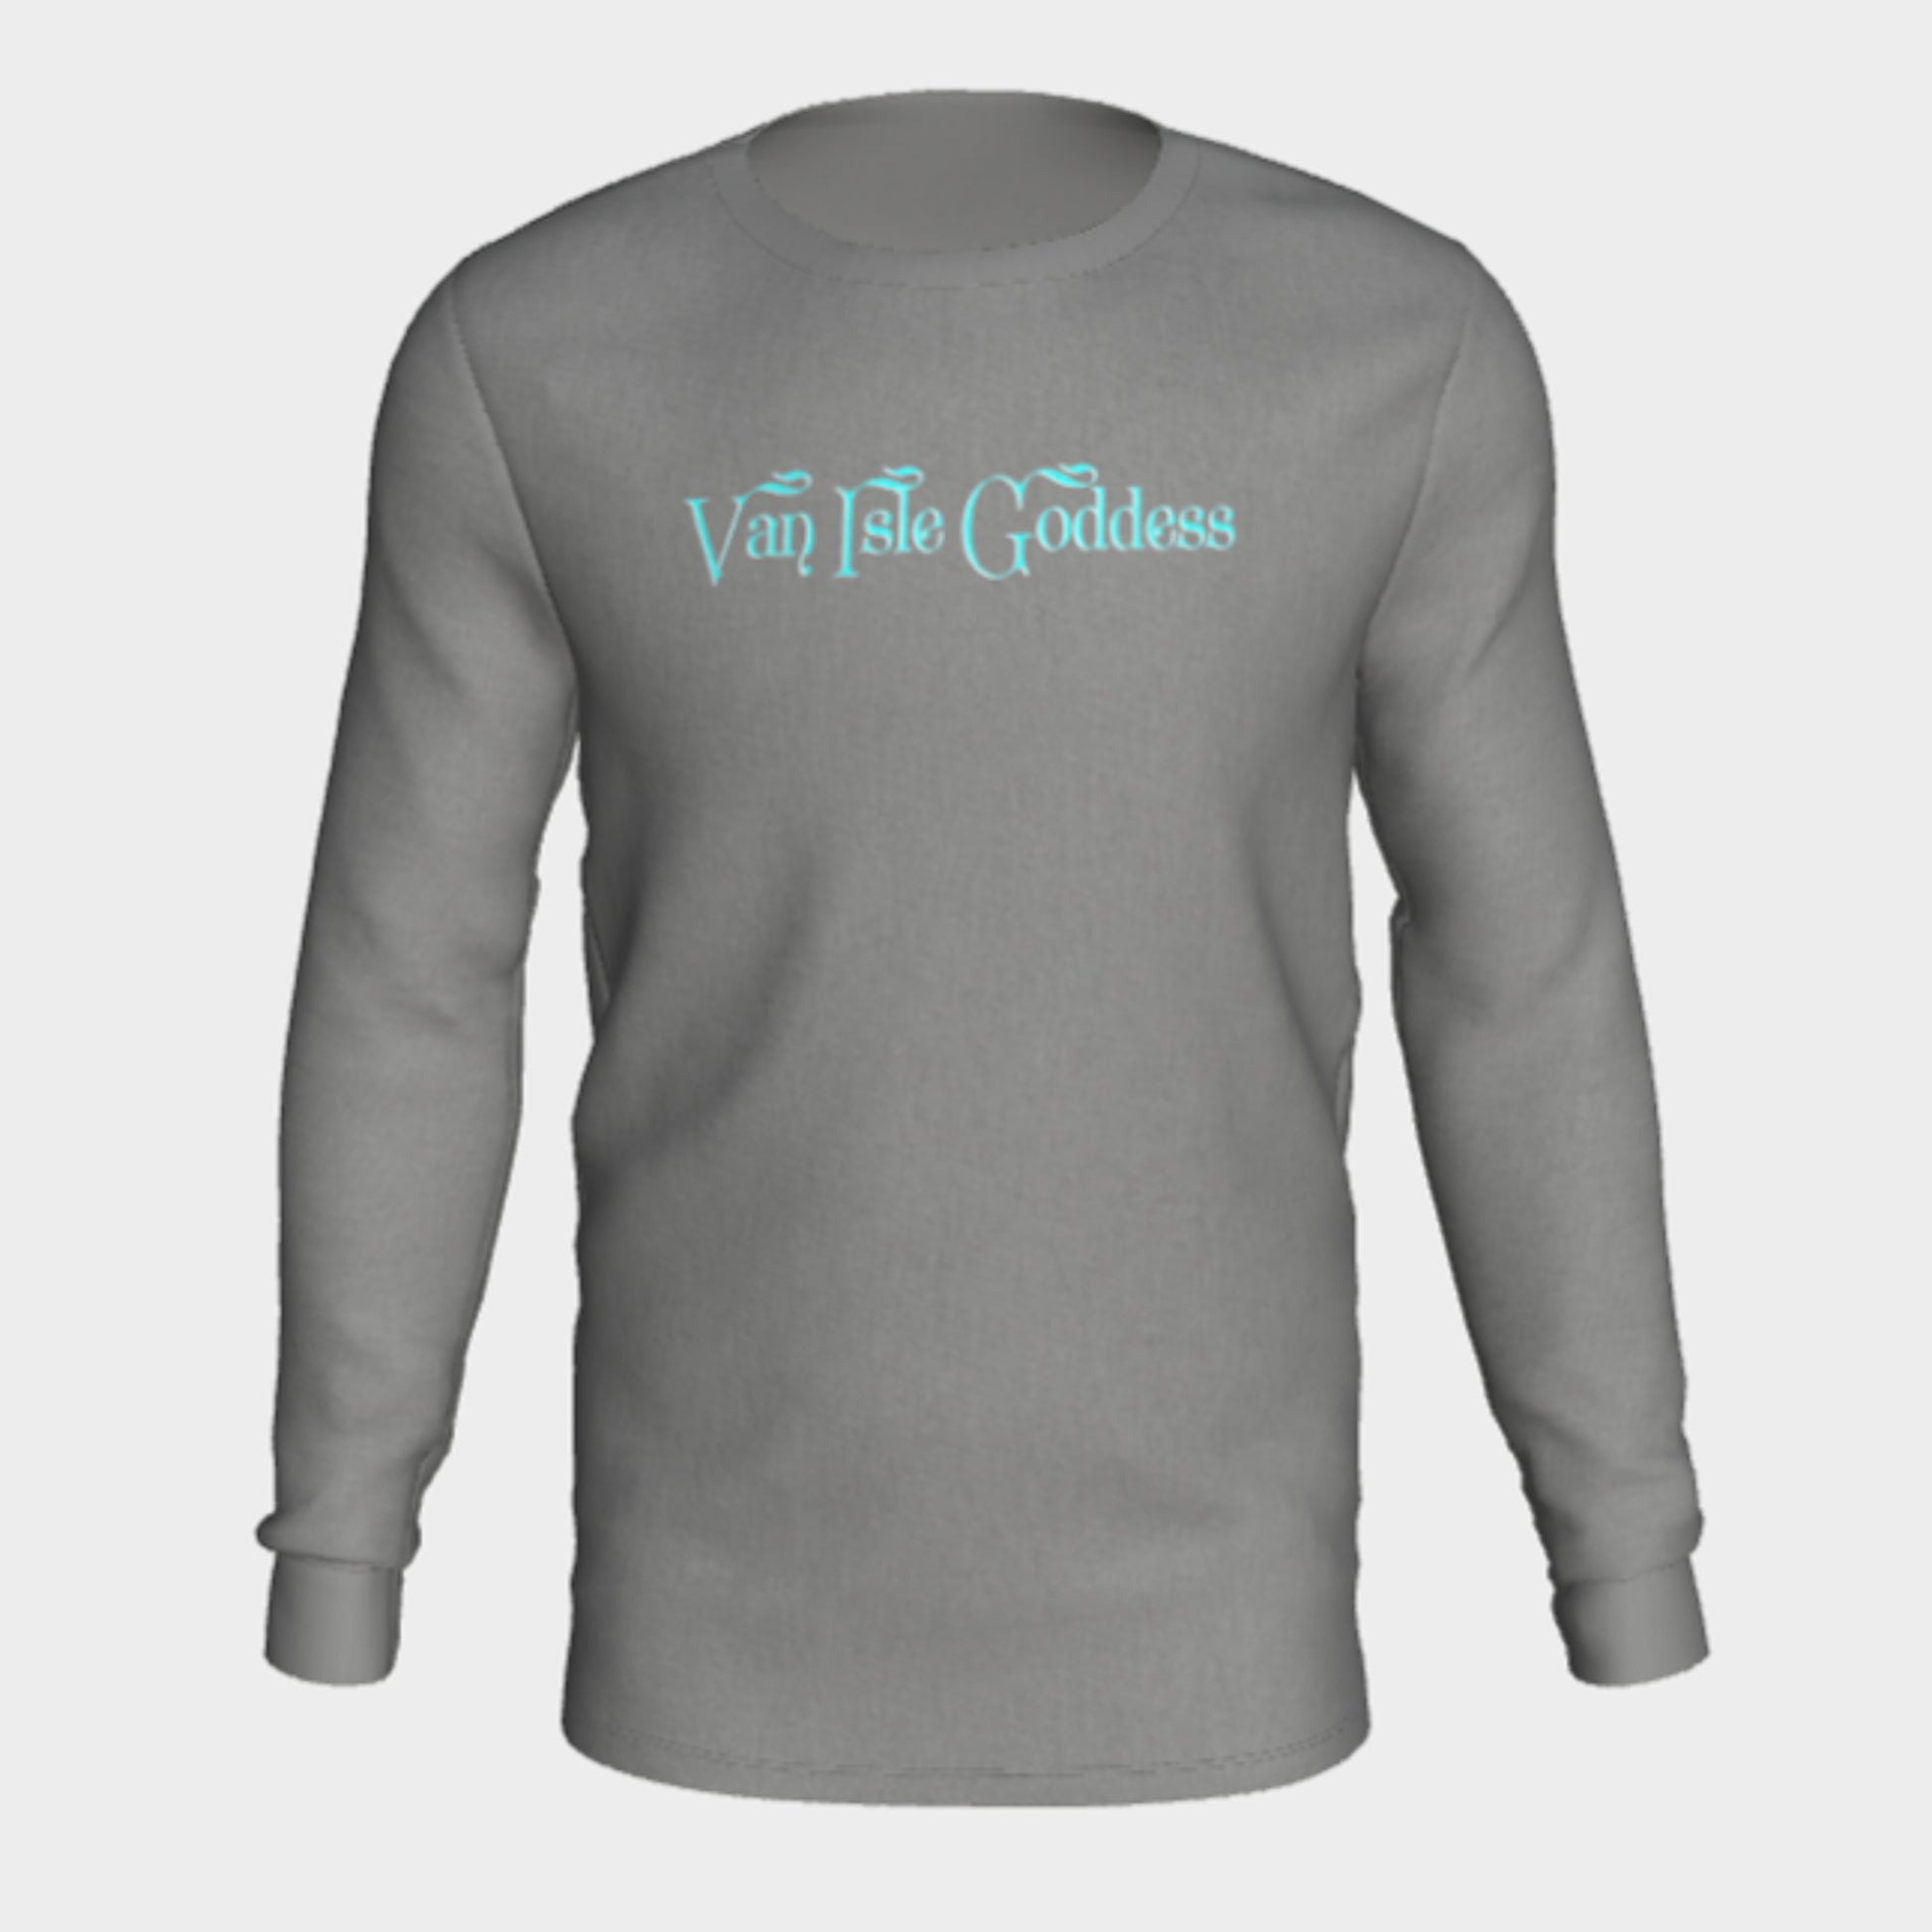 Van Isle Goddess 100% cotton crew neck long sleeve super comfy tee is a must-have basic for any wardrobe.  Features:  Flattering unisex fit Cozy long sleeves Crew neck Made with Milltex lightweight fabric Sizes small to 2XL